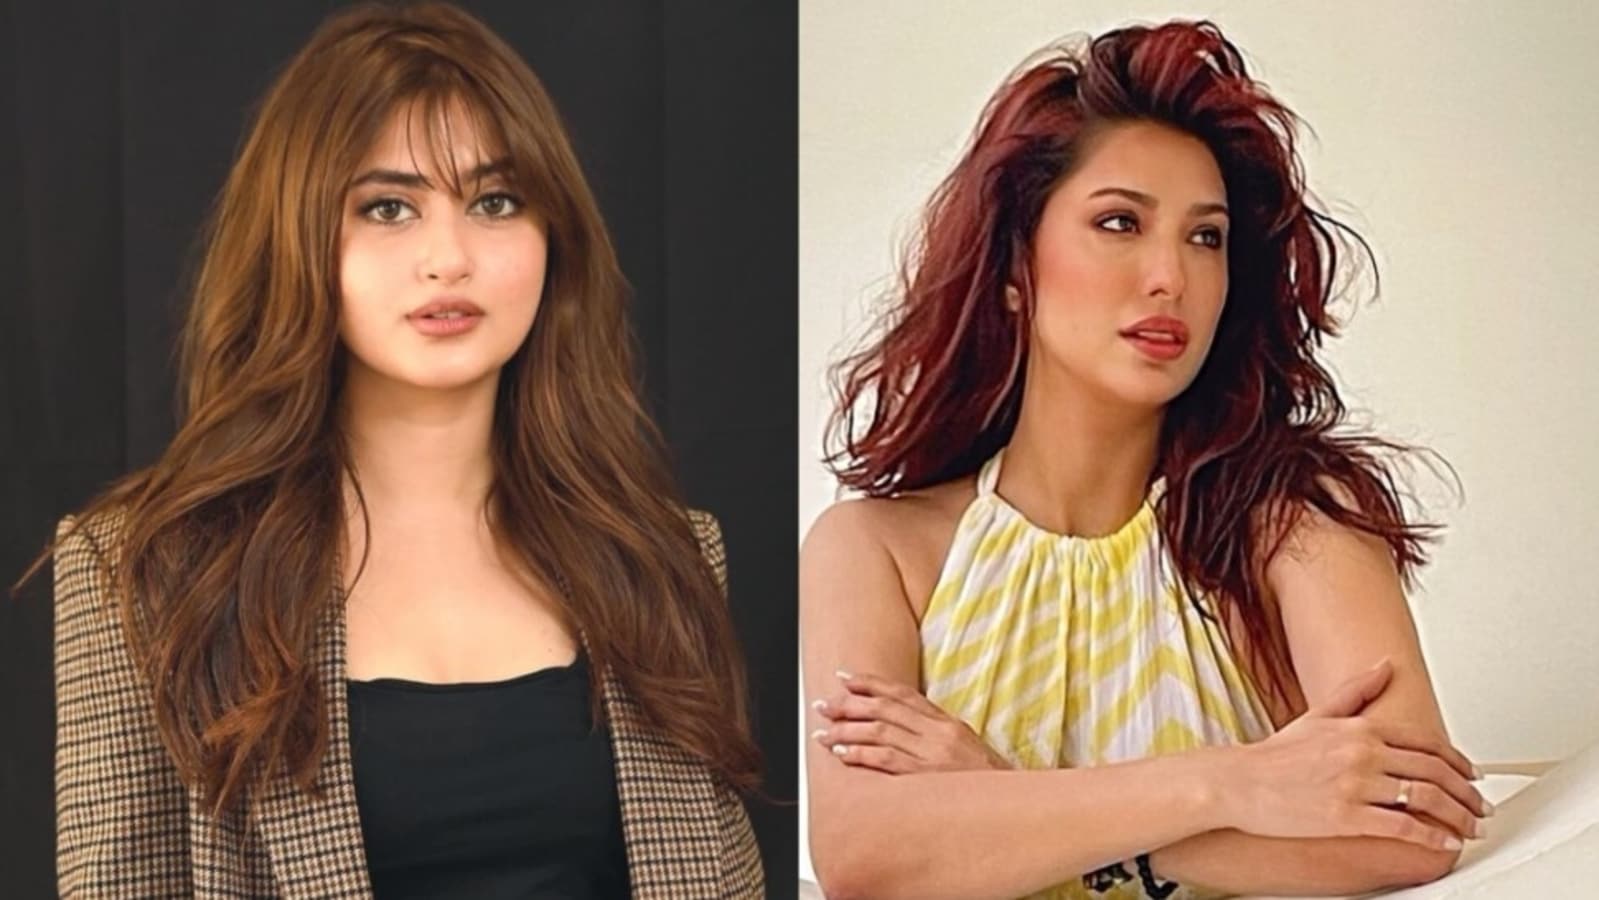 Sajal Ali Xxx Porn - Sajal Ali, Mehwish react to ex-Pak army officer's claims against  'actresses' - Hindustan Times